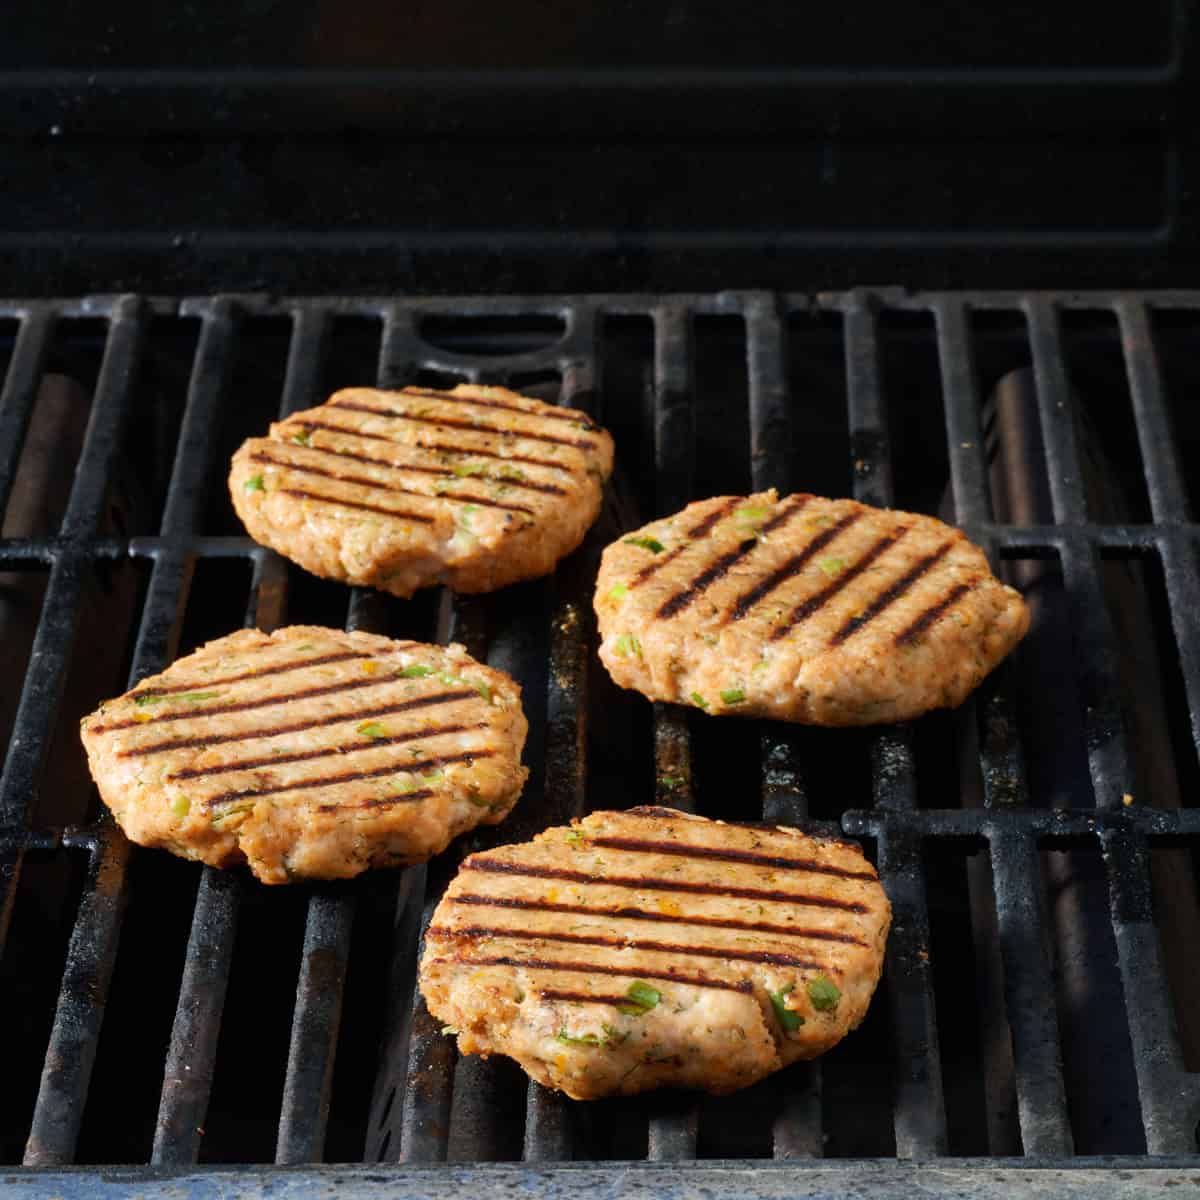 Four cooked salmon burgers on a grill.